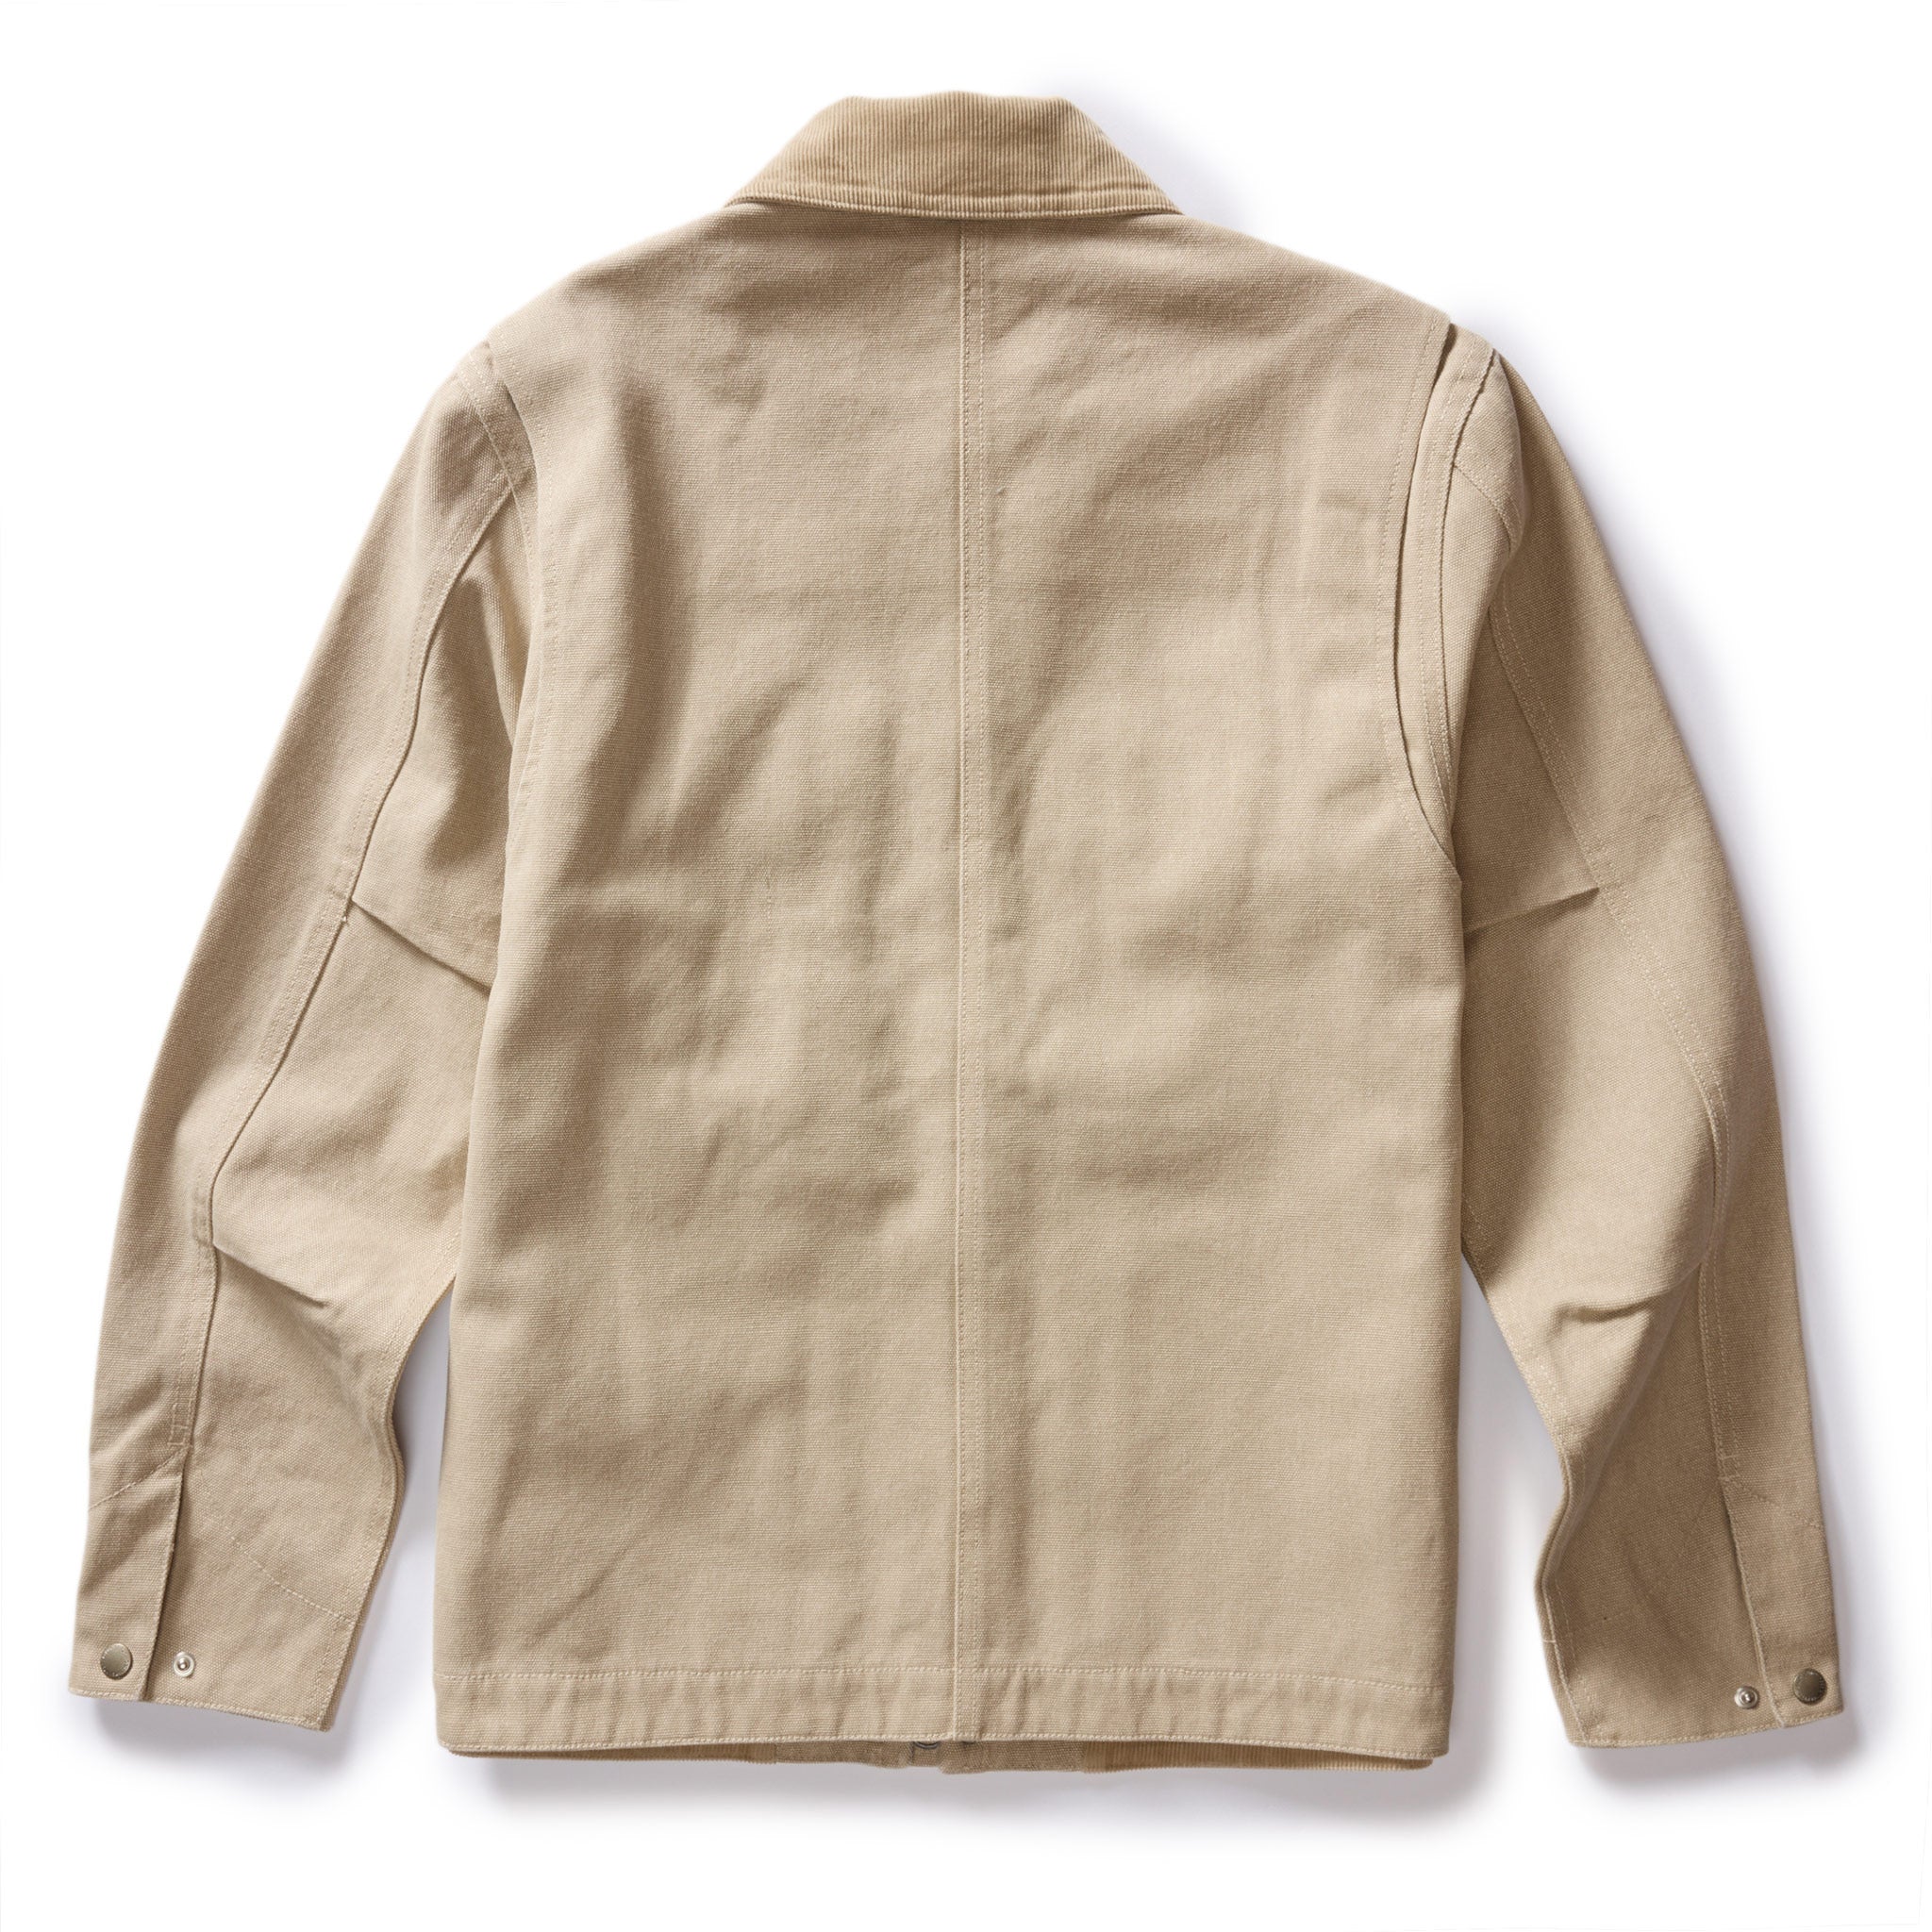 The Workhorse Utility Jacket in Light Khaki Chipped Canvas